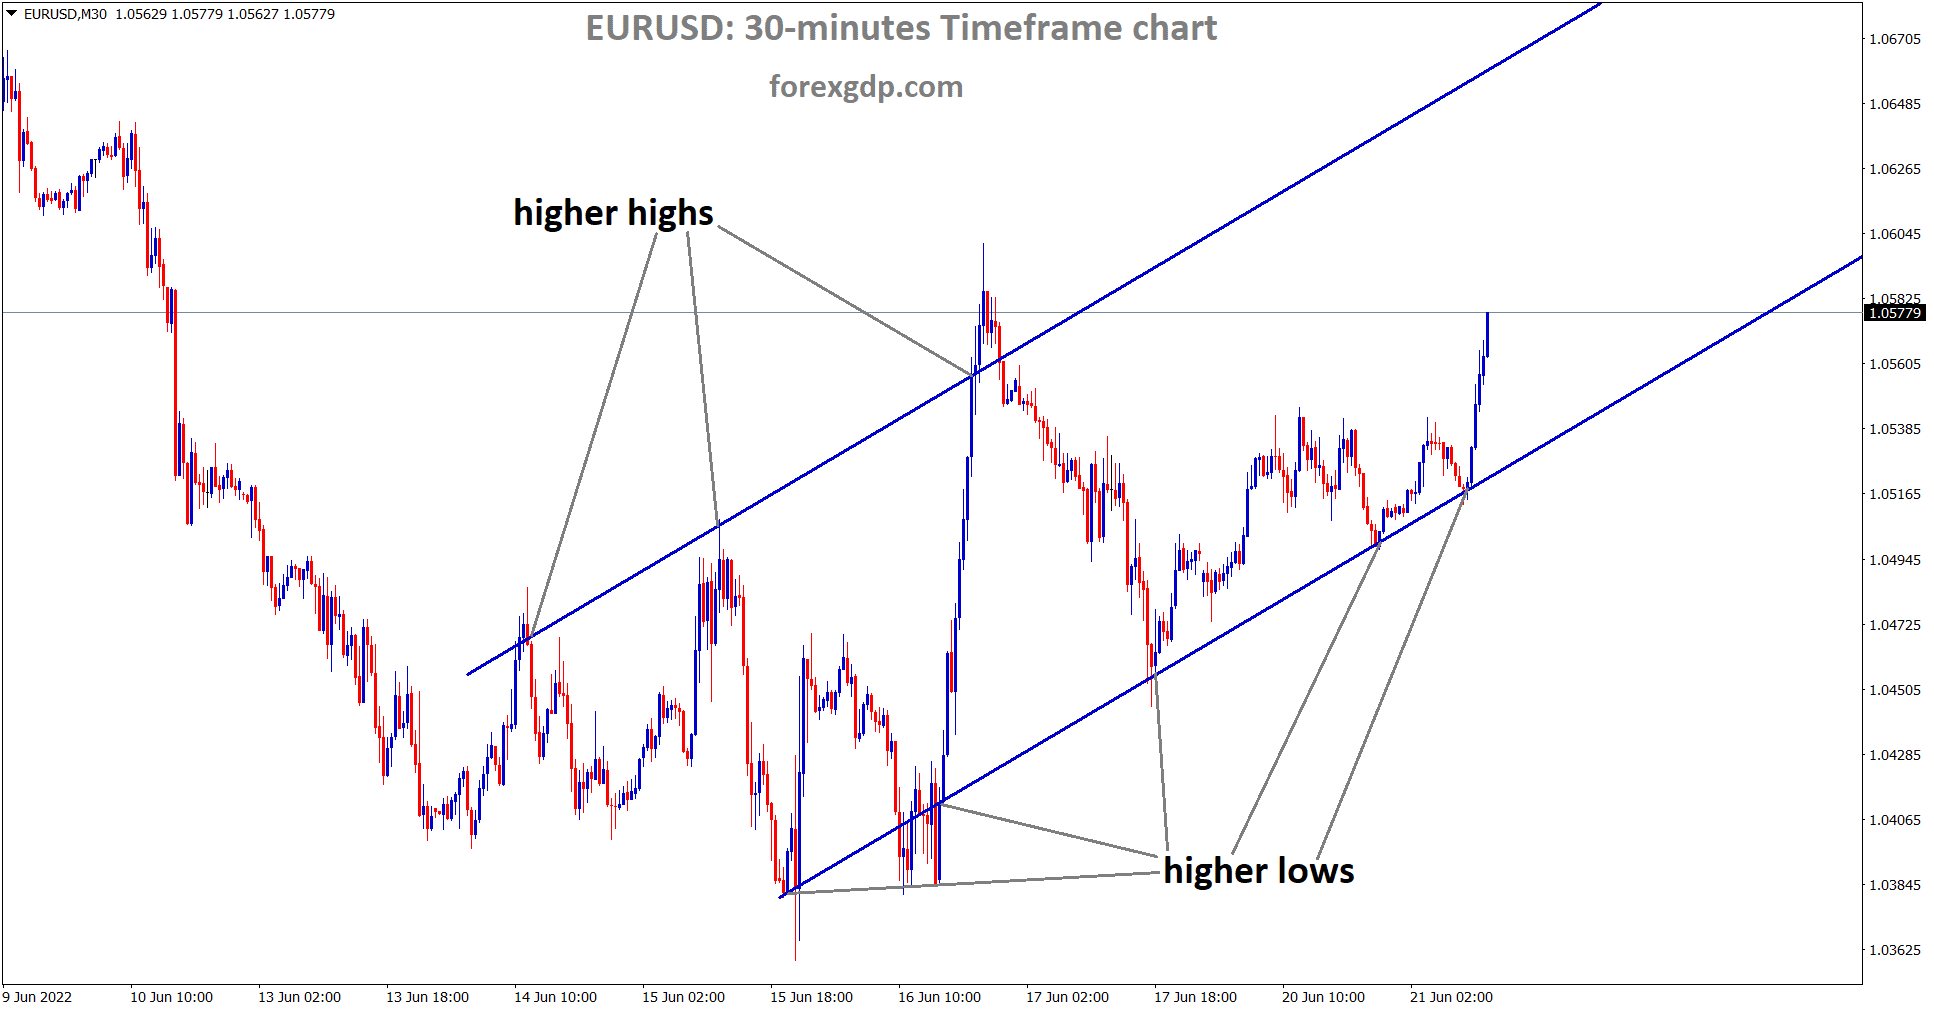 EURUSD is moving in ascending channel and the market has rebounded from the higher low area of the channel